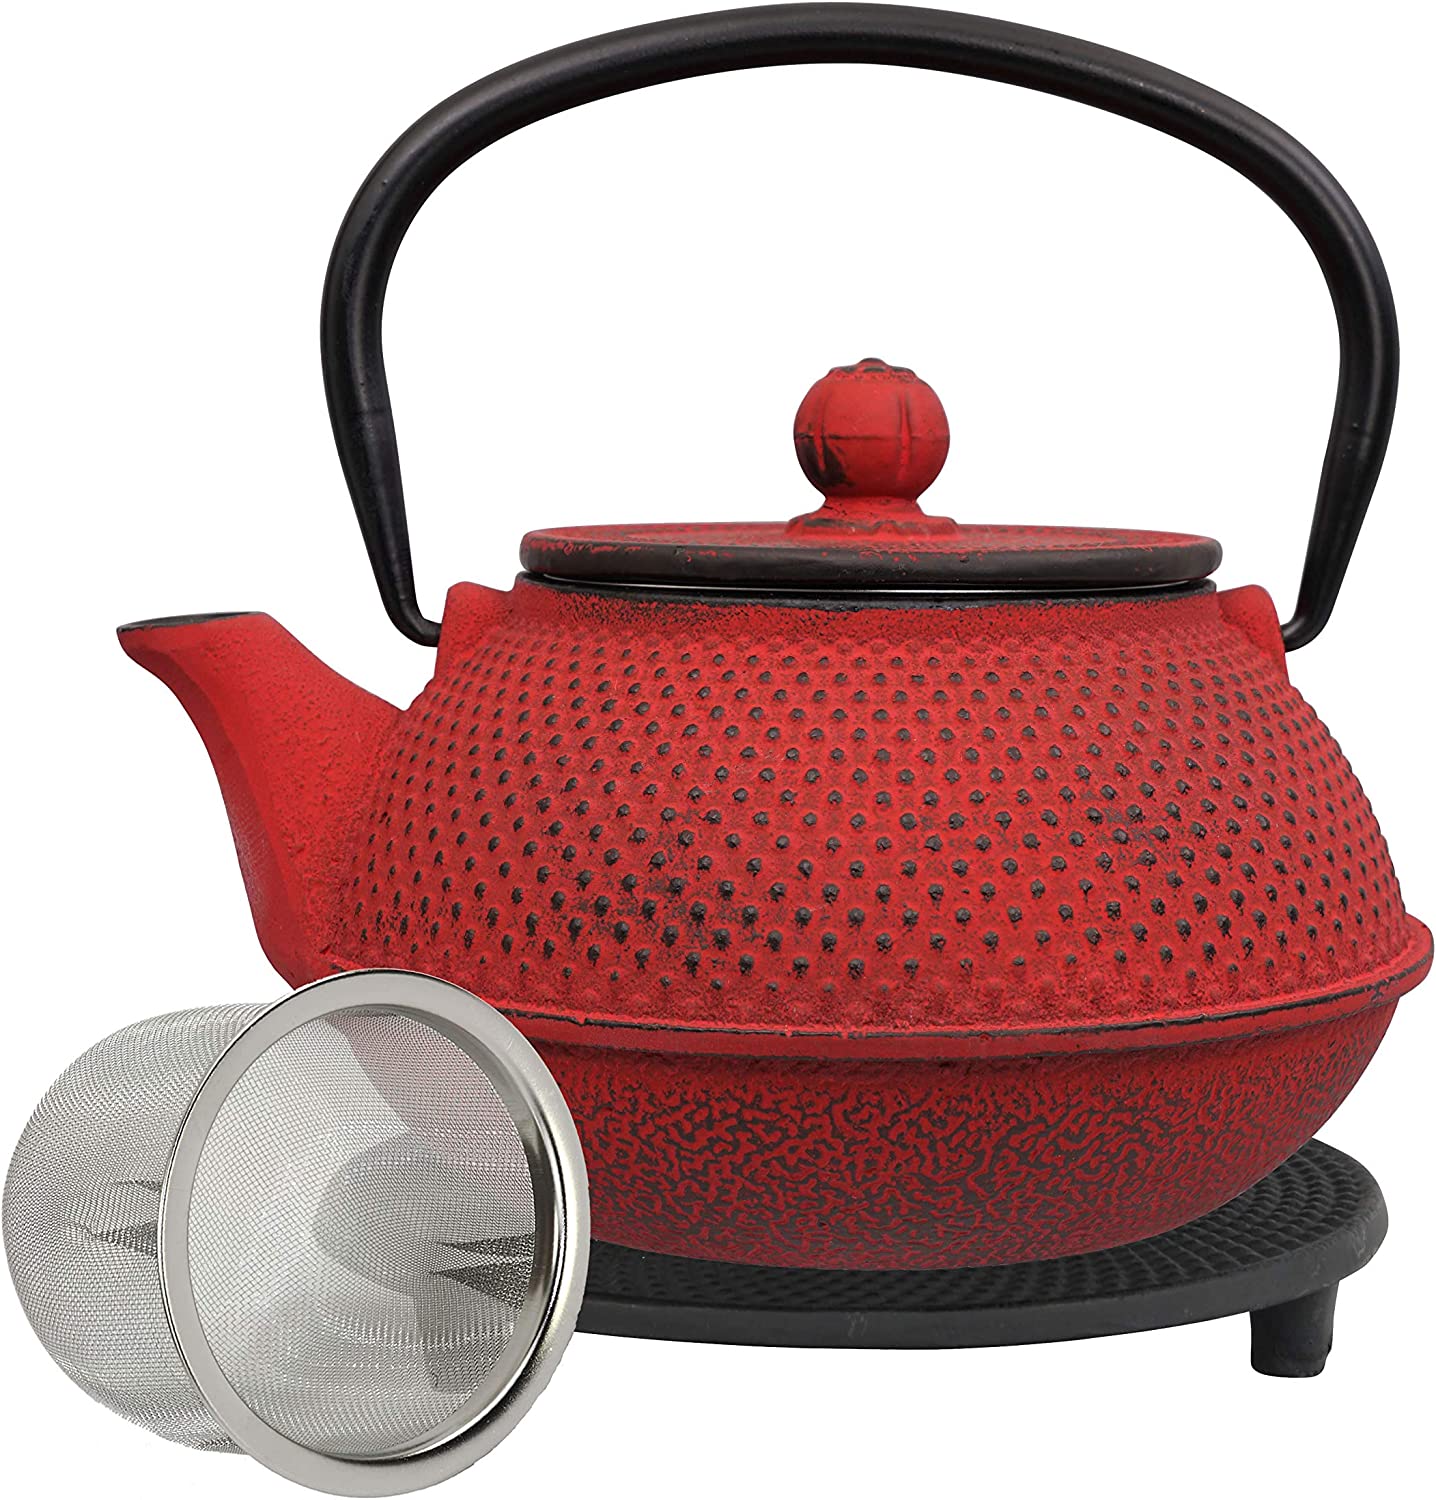 Teeblume Cast Iron Teapot Arare Cast Iron Teapot with Strainer Includes Free Coaster in Black Teapot Kettle Inside Fully Enamelled Choice of Colours and Sizes, 900 ml